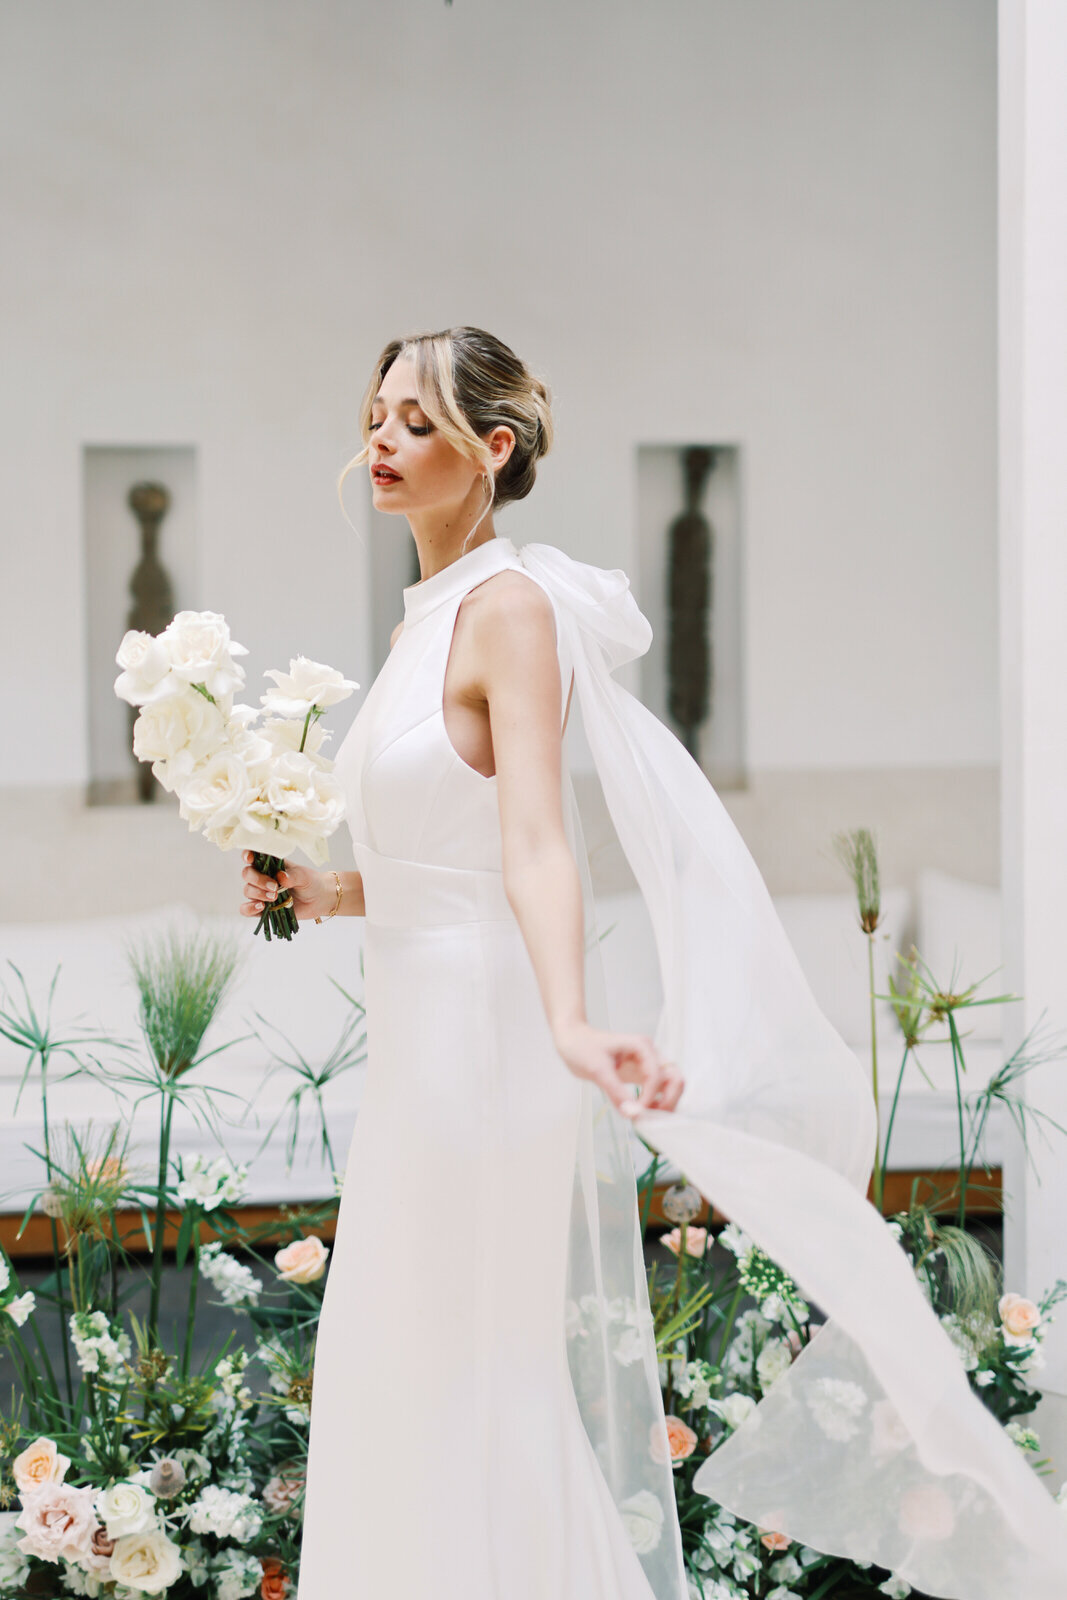 Stylish Elopement Photography in Marrakech 2